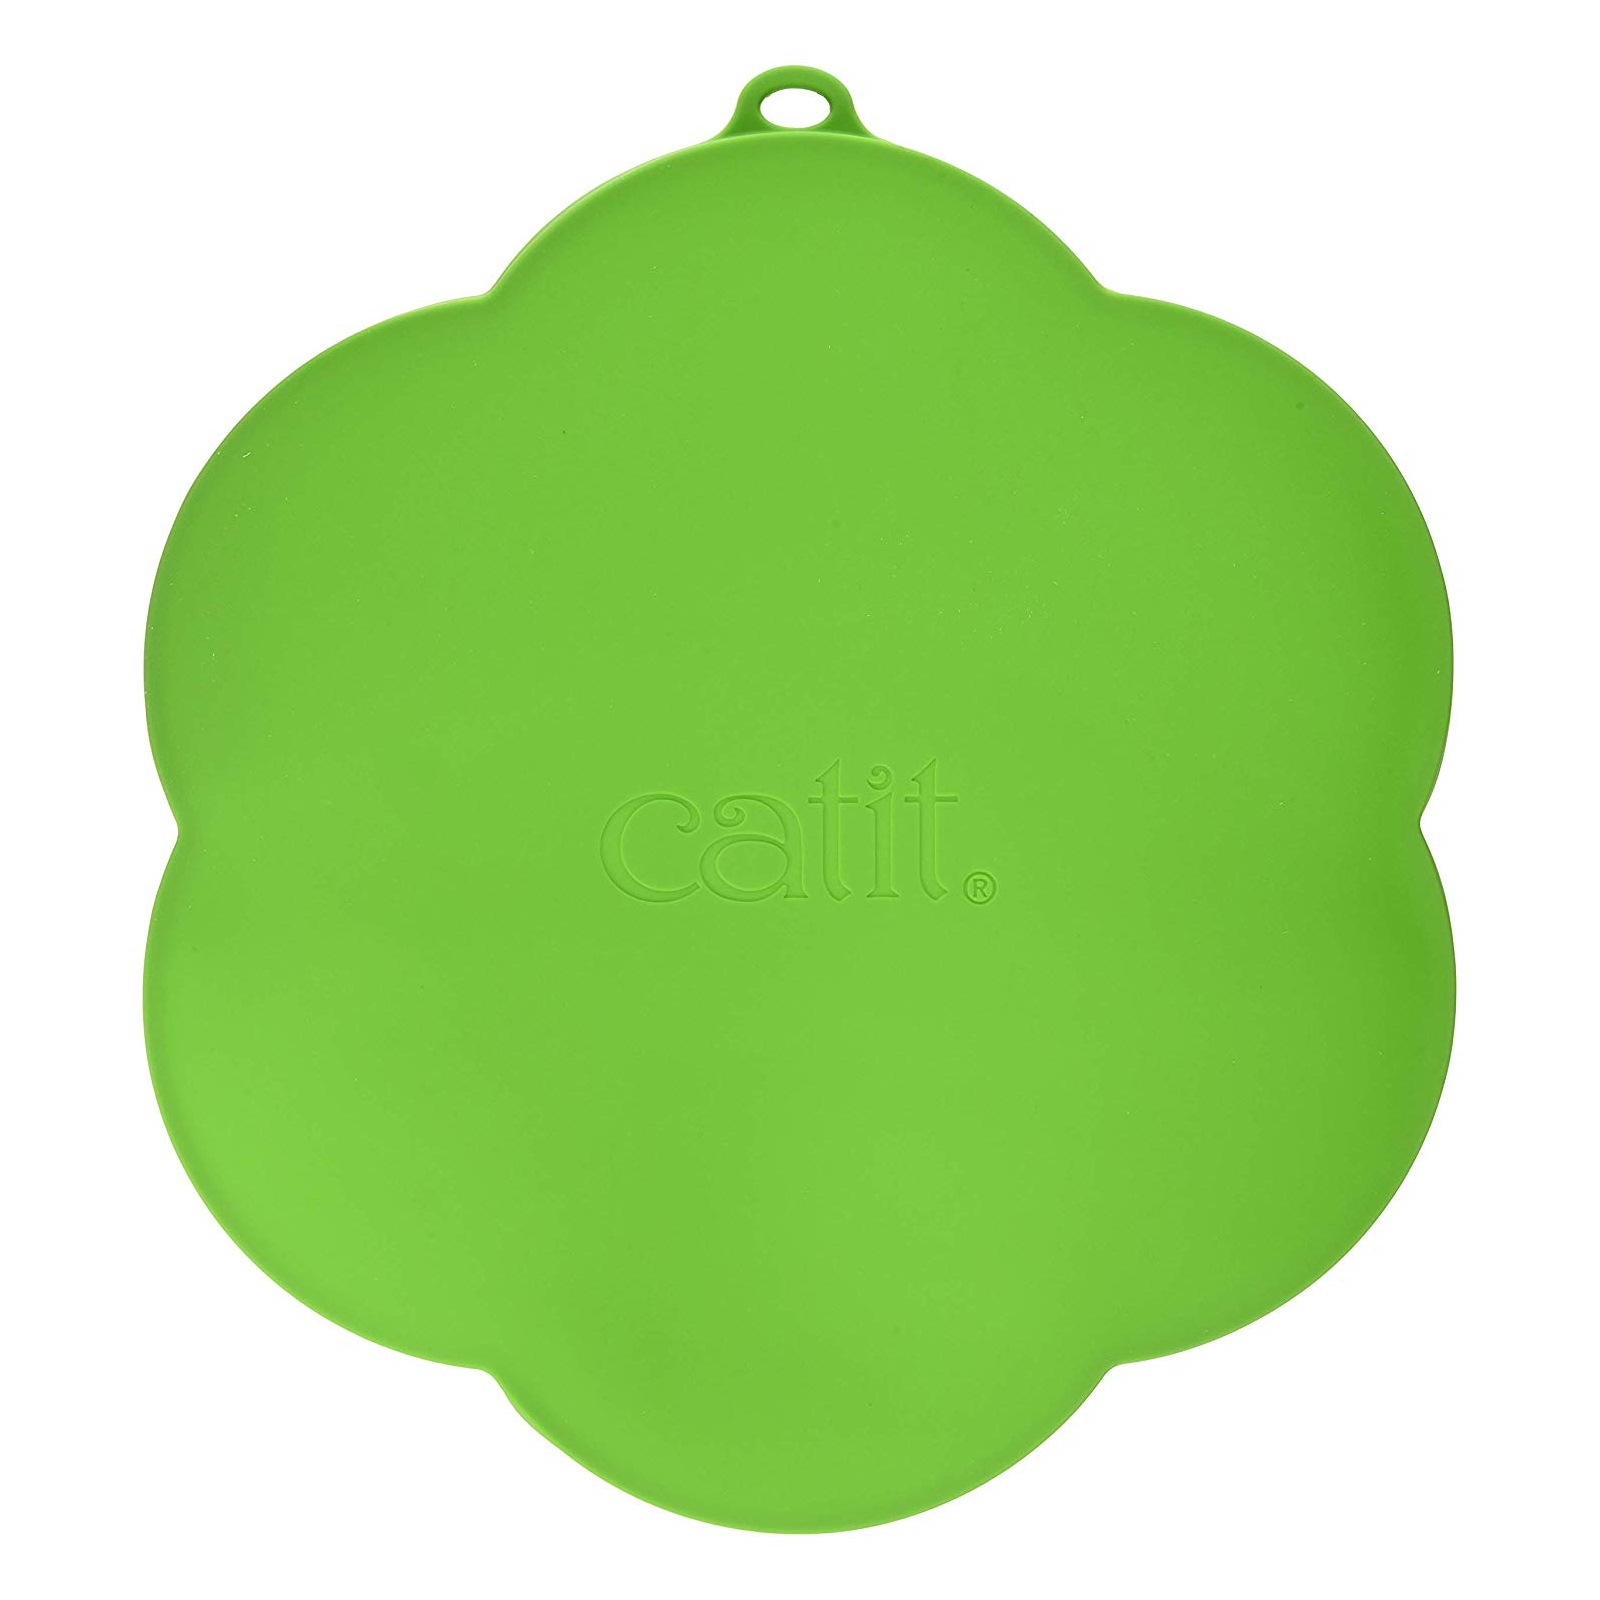 Catit Flower Shaped Silicone Placemat to Stop Spills image 3